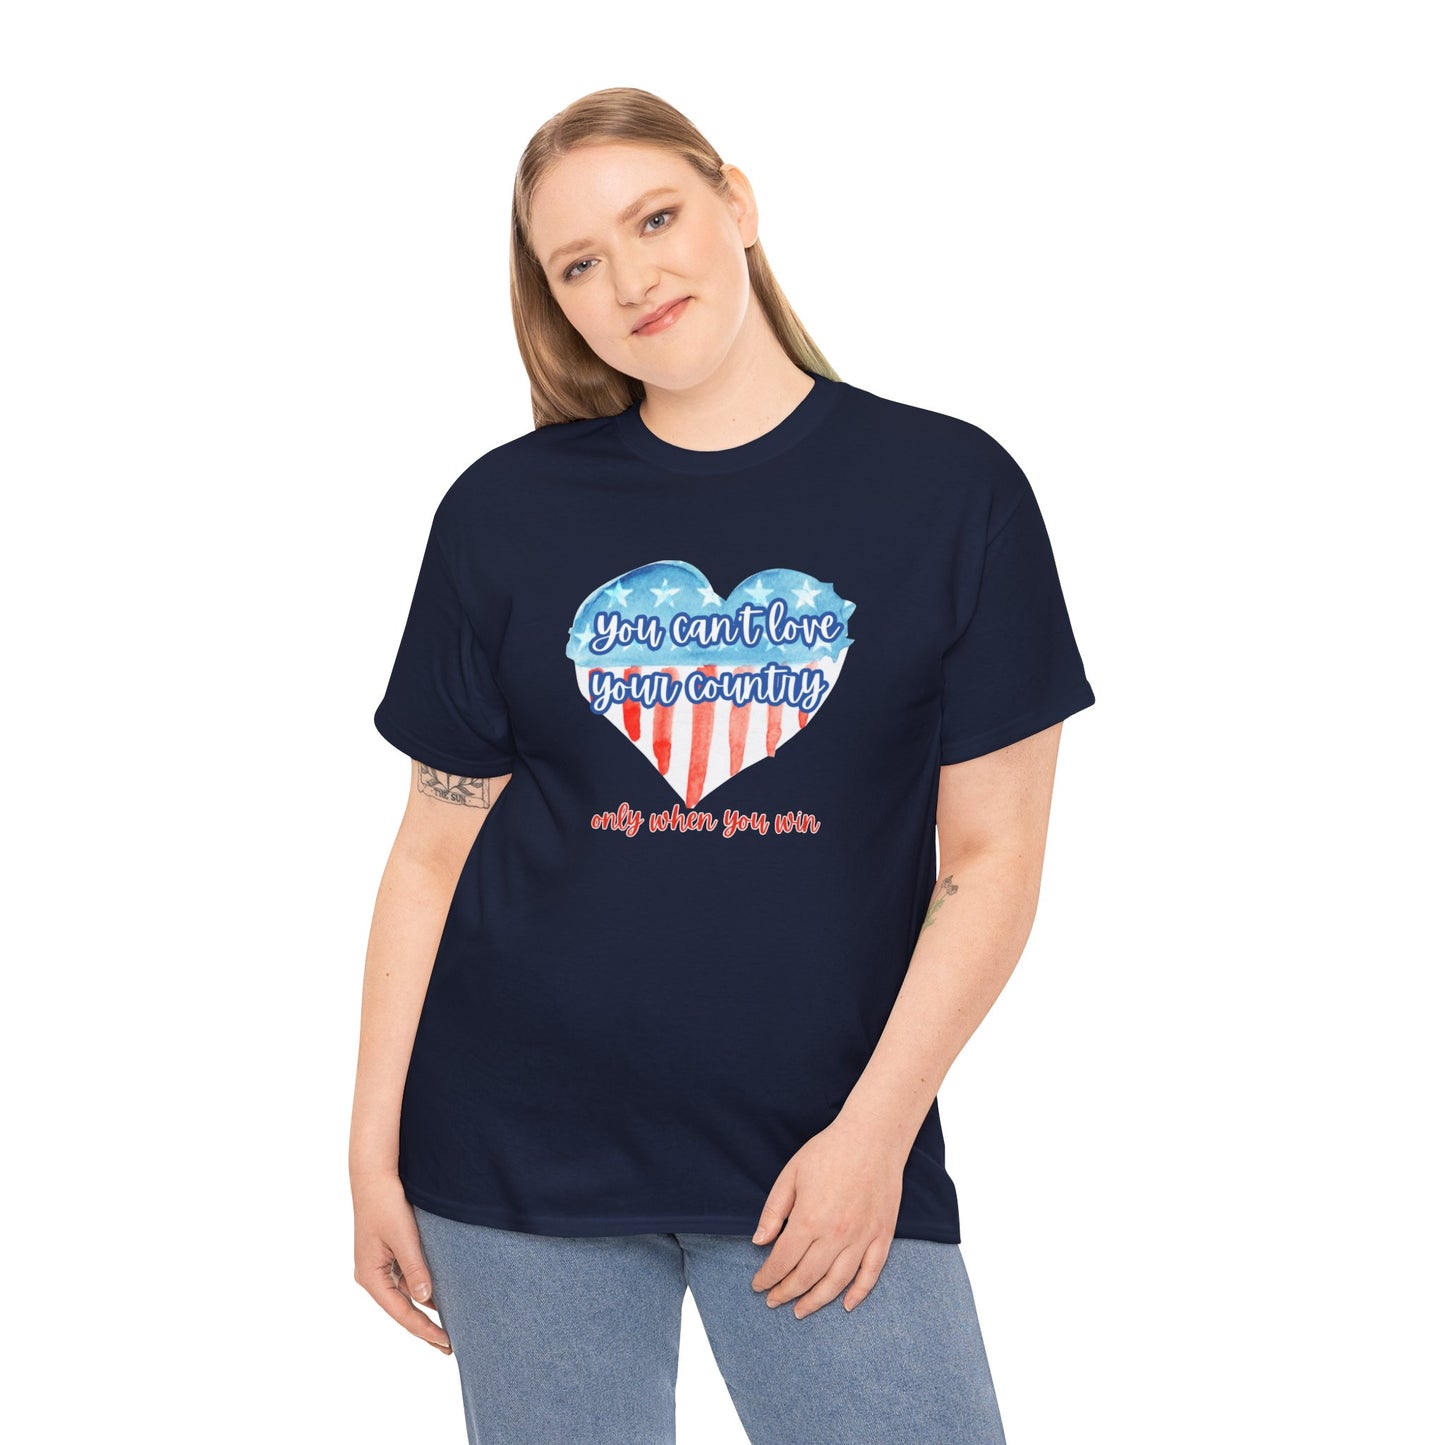 You can't love your country only when you win t-shirt, positive pro Biden, anti Trump, Never Trumper, T-shirt, pro democracy, heart flag